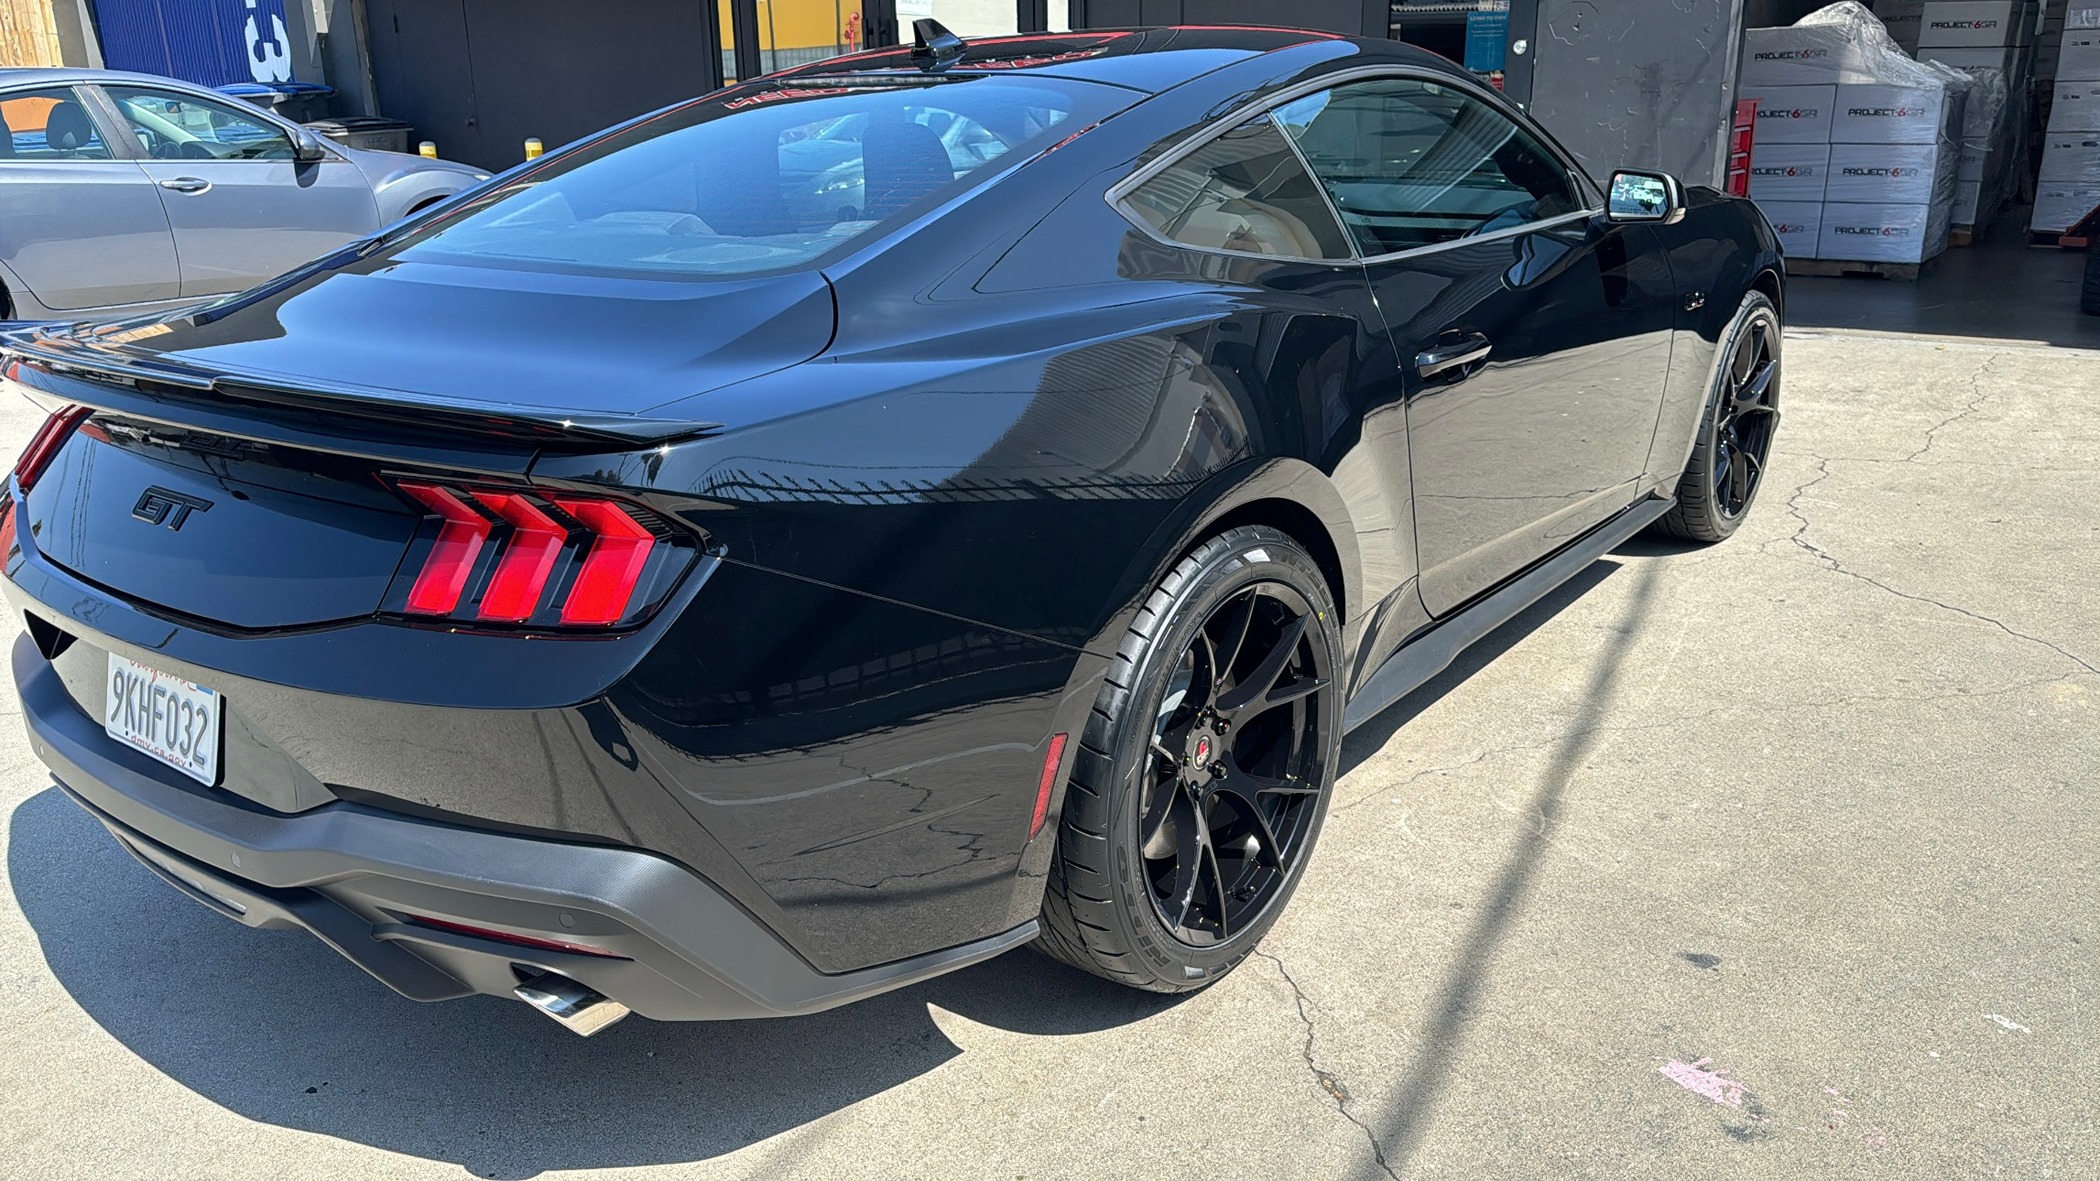 S650 Mustang Official S650 Dark Horse Aftermarket Wheel/Tire Thread! C103765A-B47A-4E8A-AD3C-10728AF4F617